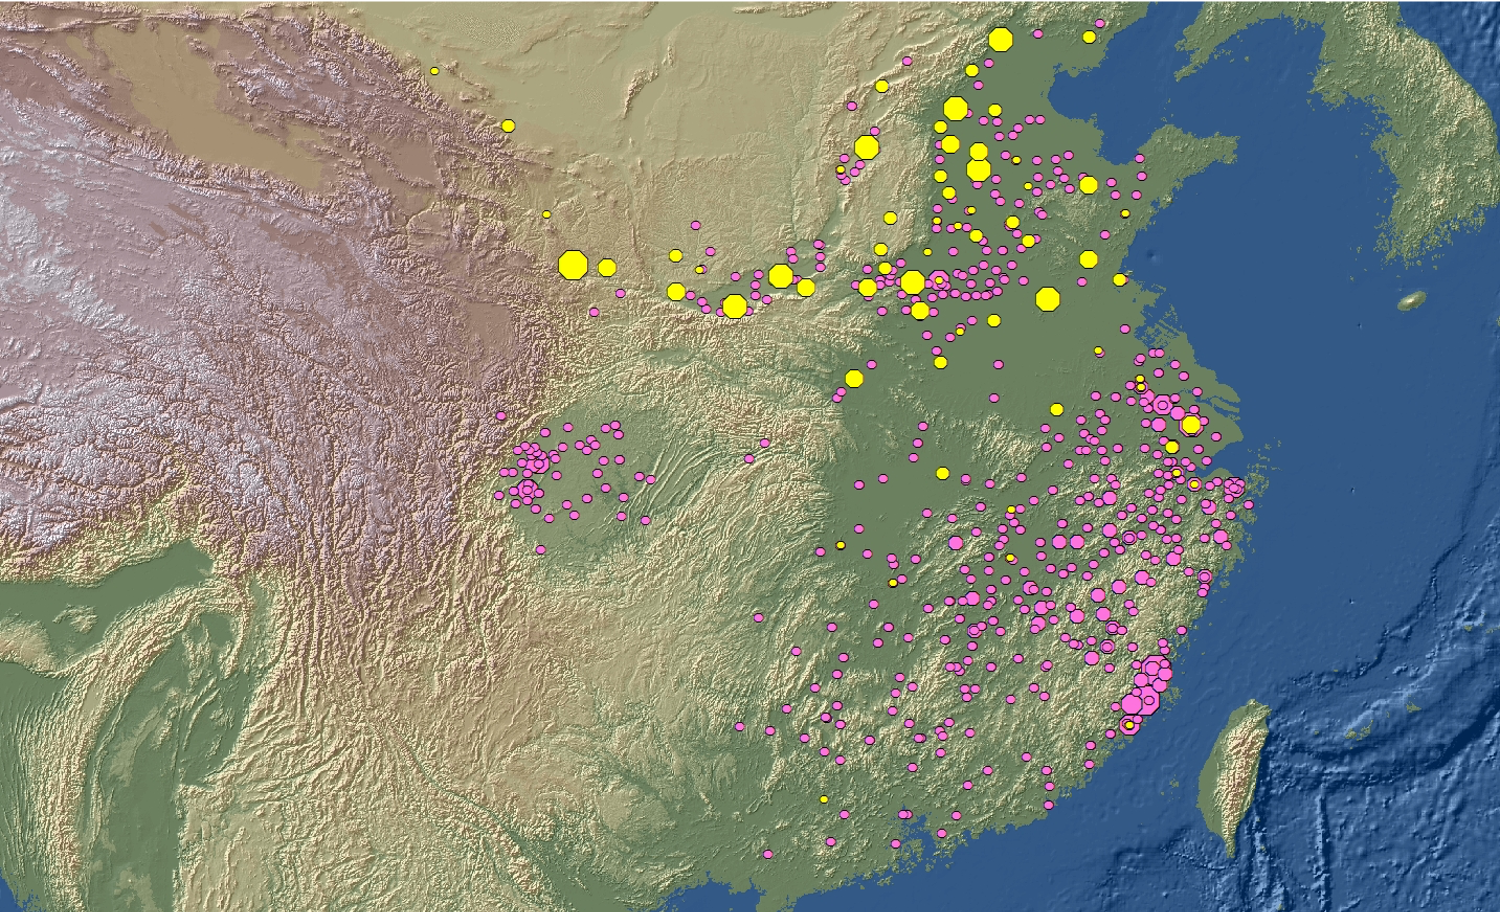 This map compares the native places of “presented scholars” (jinshi) in the Tang and Song dynasties. The yellow dots denote examples from the Tang Dynasty and the pink dots represent Song Dynasty examples.